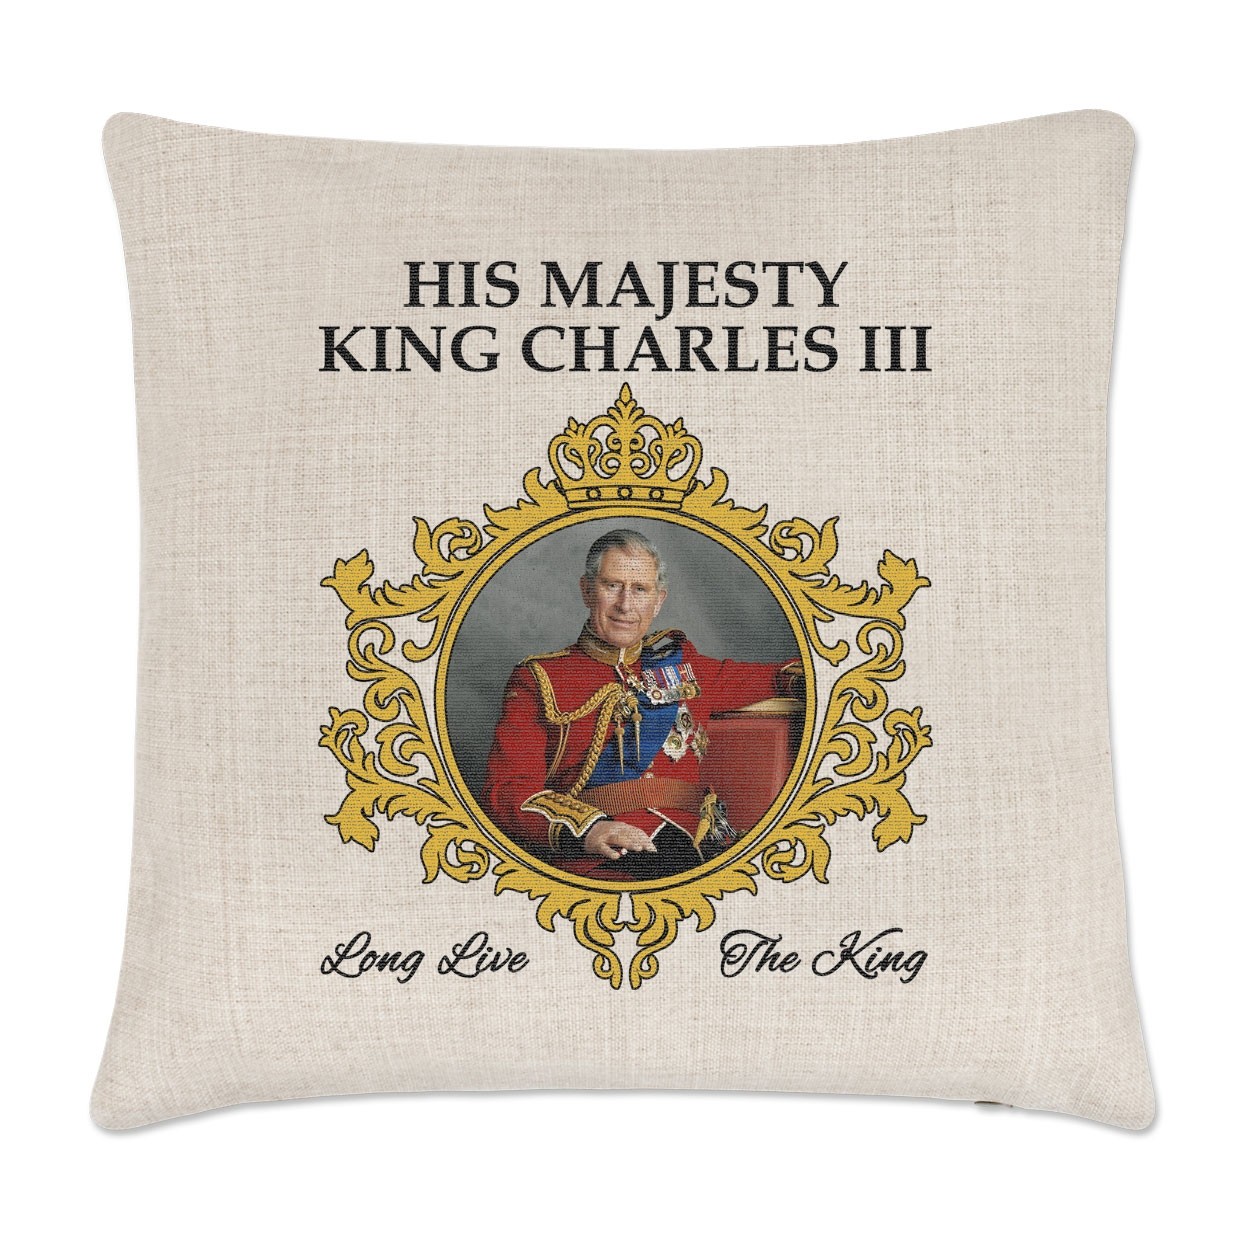 King Charles III 2022 Cushion Cover Commemorative Gift His Majesty